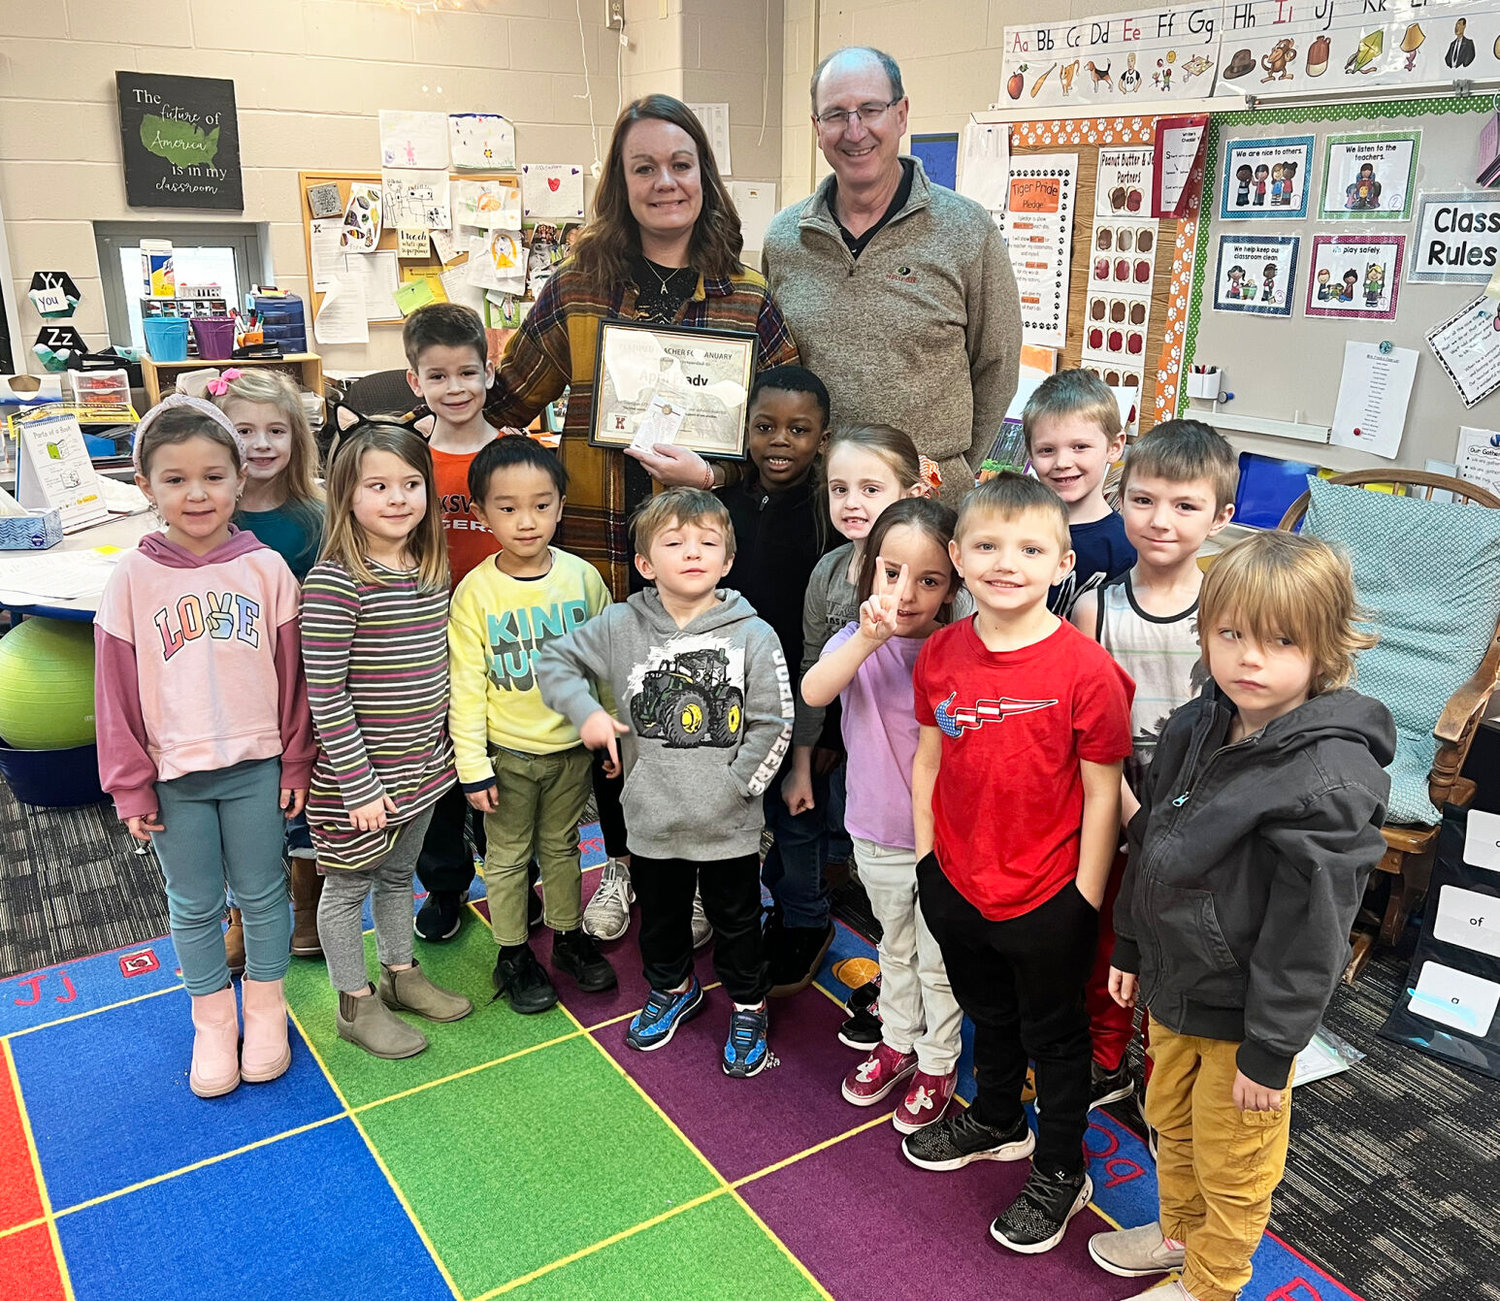 April Frady is a Unionville native and has been teaching Kindergarten for 19 years, including 9 years at Kirksville Elementary School.